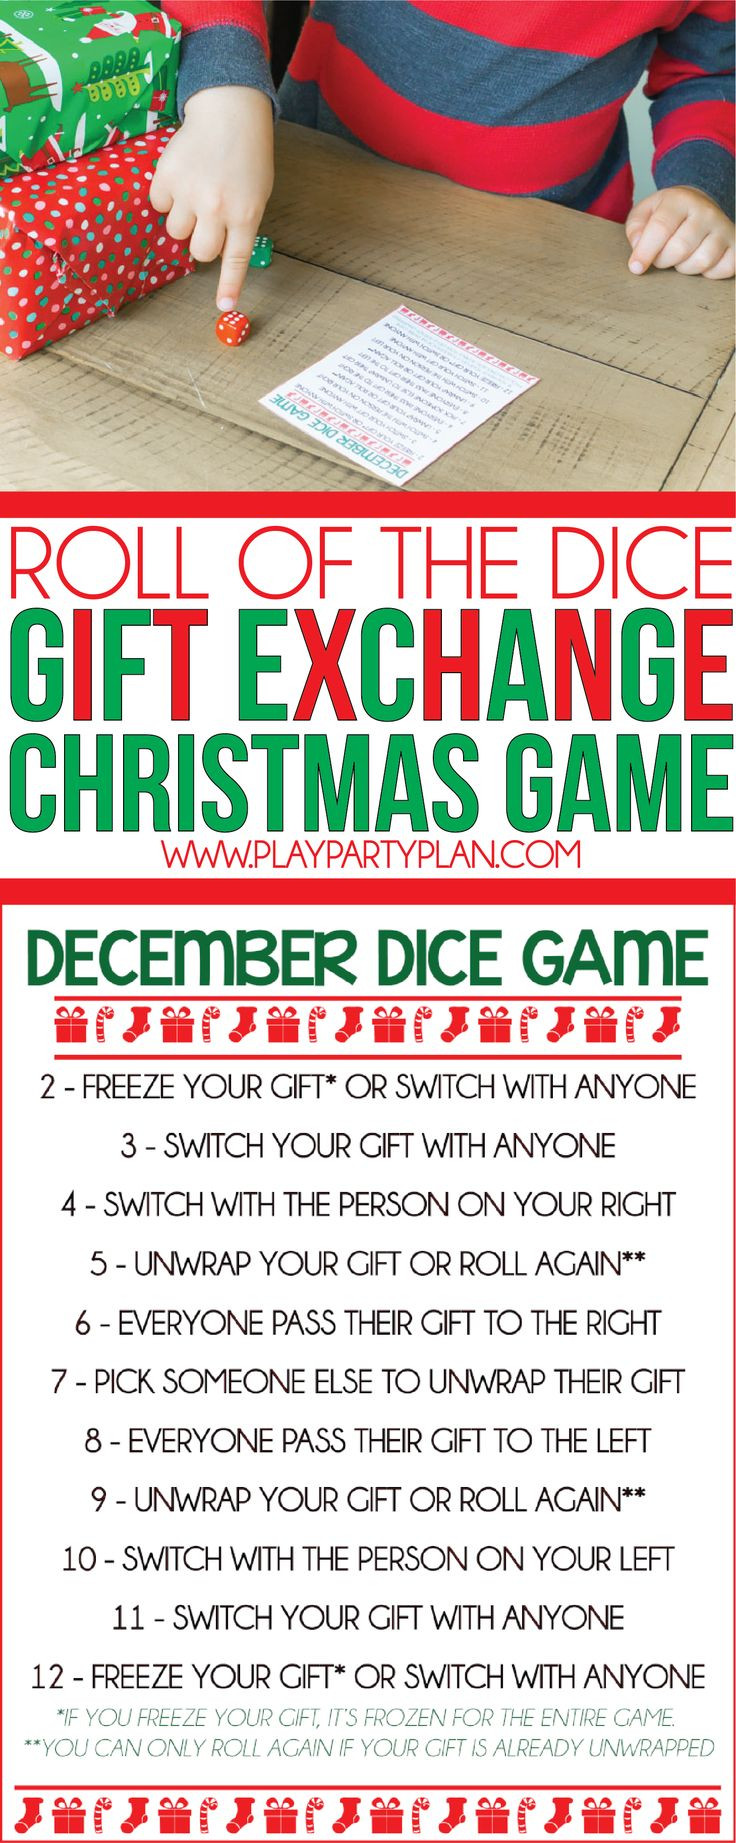 Office Christmas Gift Exchange Ideas
 25 unique Gift exchange games ideas on Pinterest